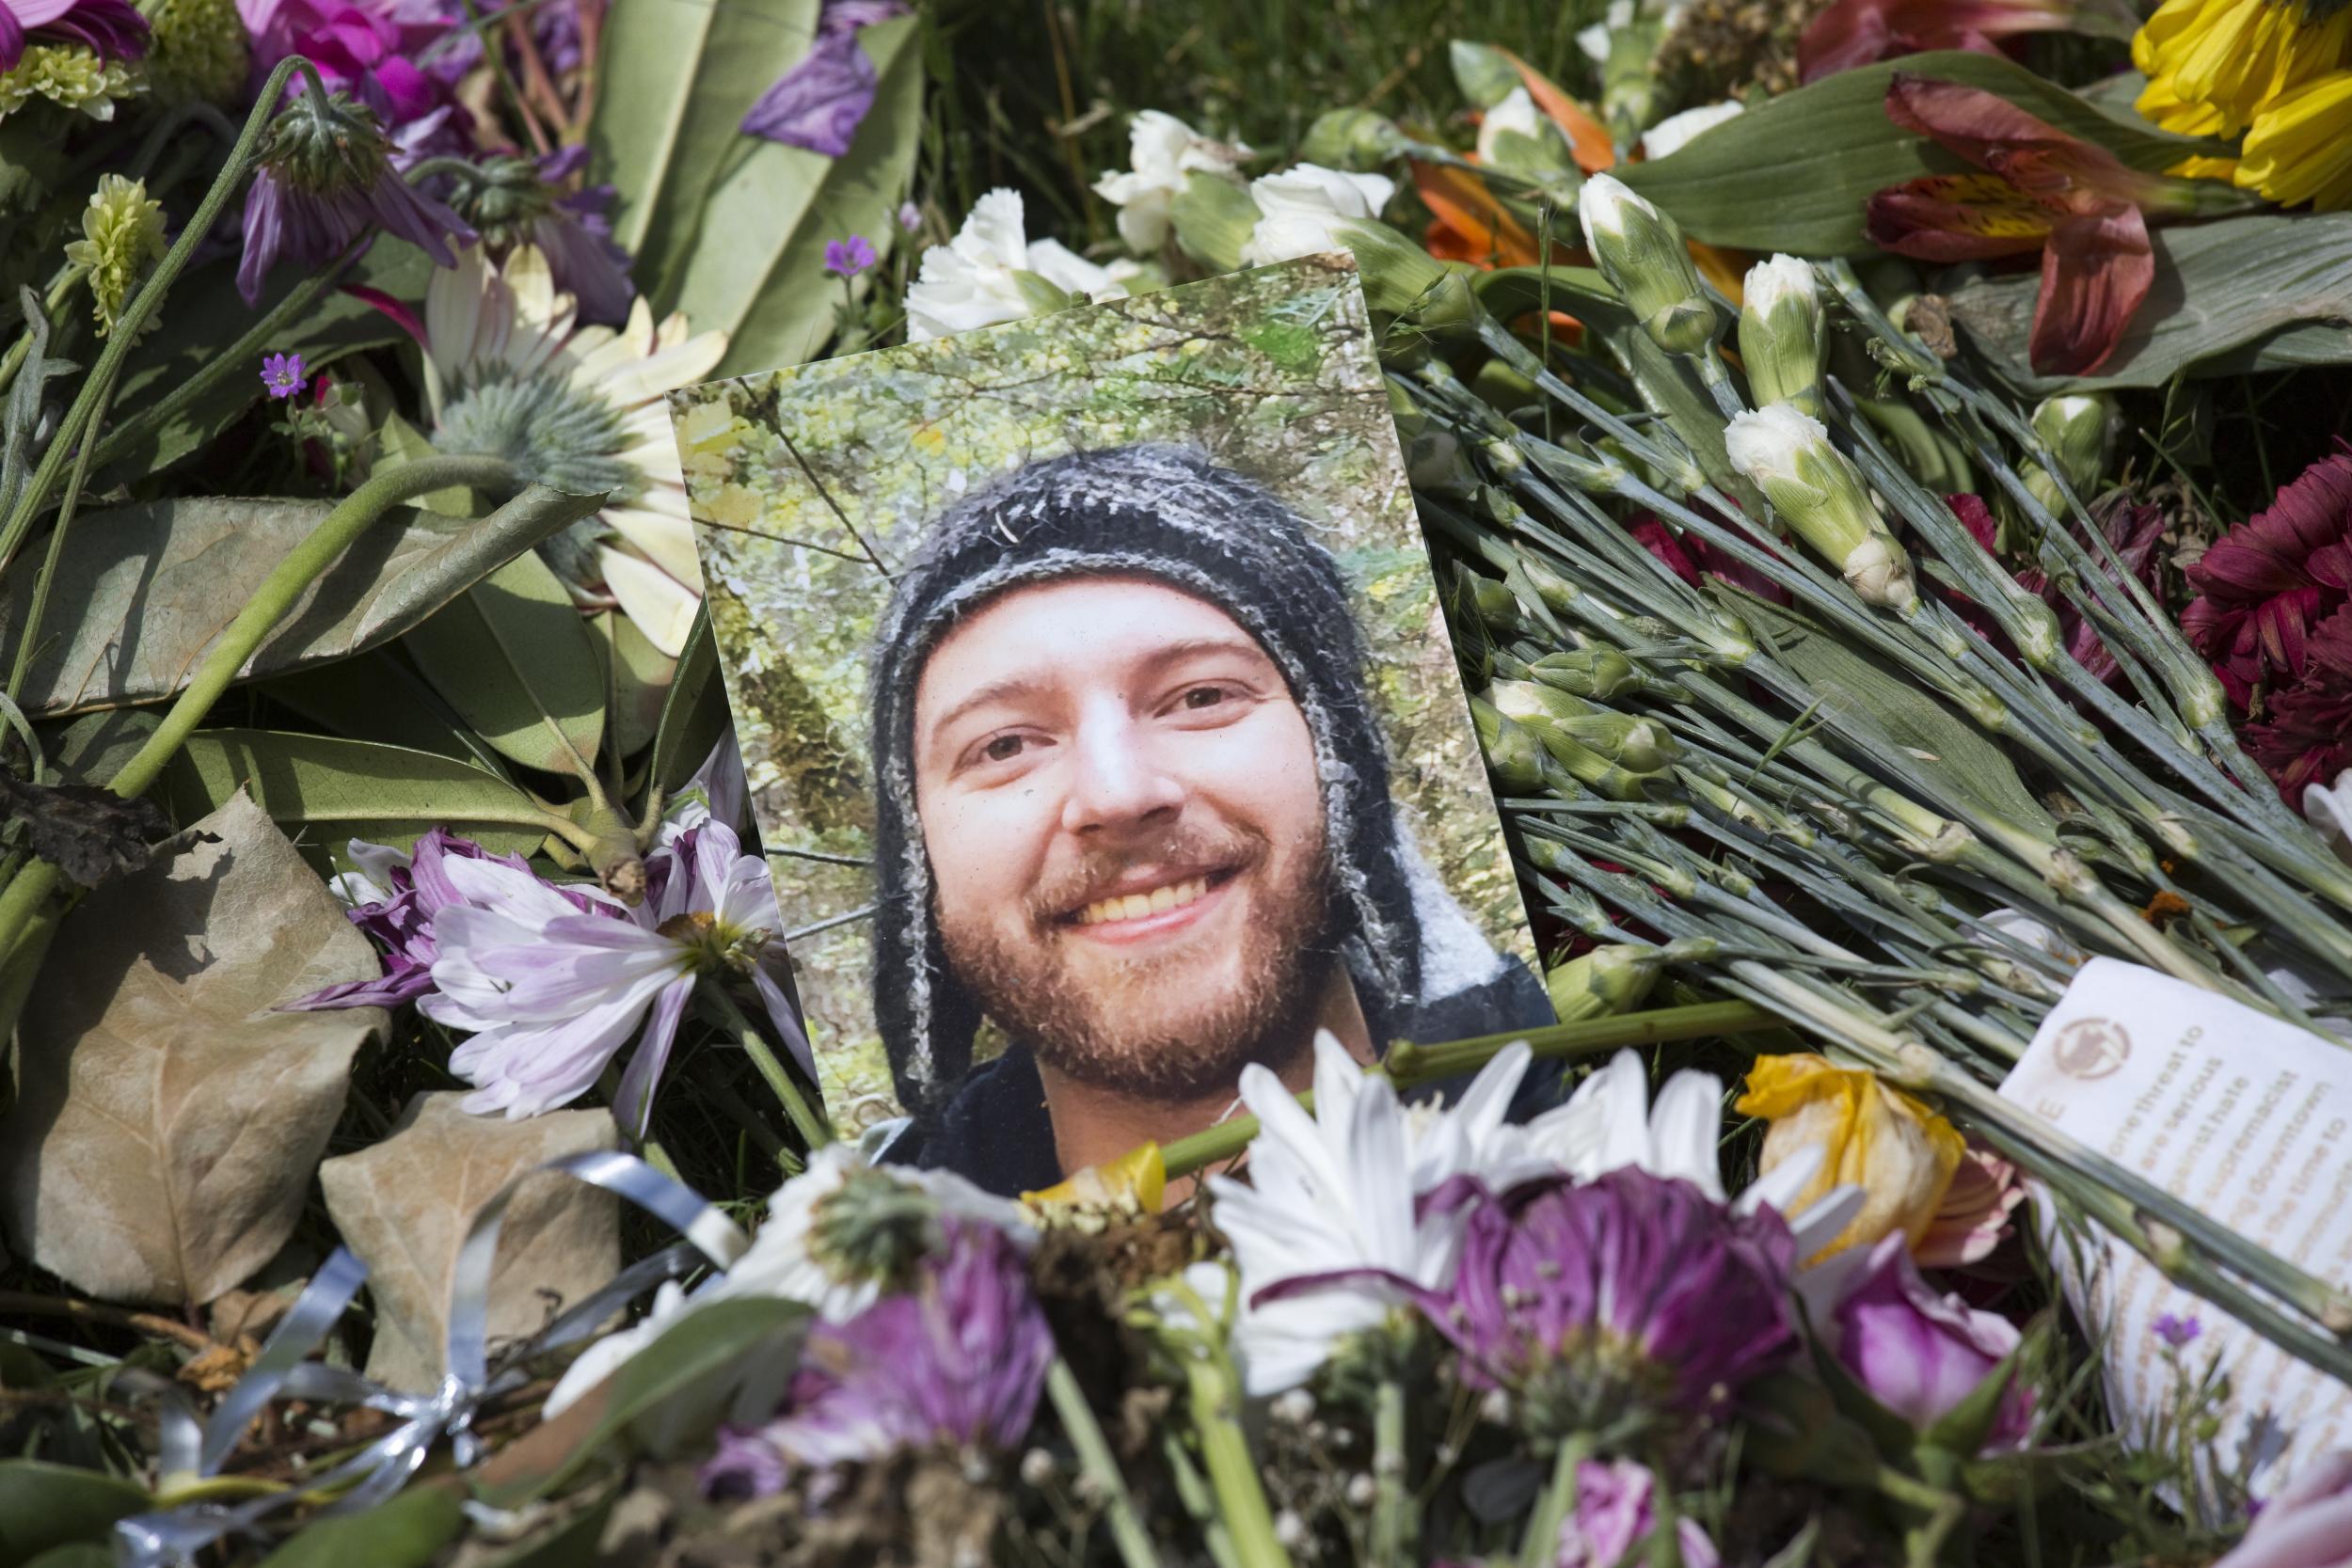 23-year-old Taliesin Myrddin Namkai Meche was fatally stabbed after standing up for two black women